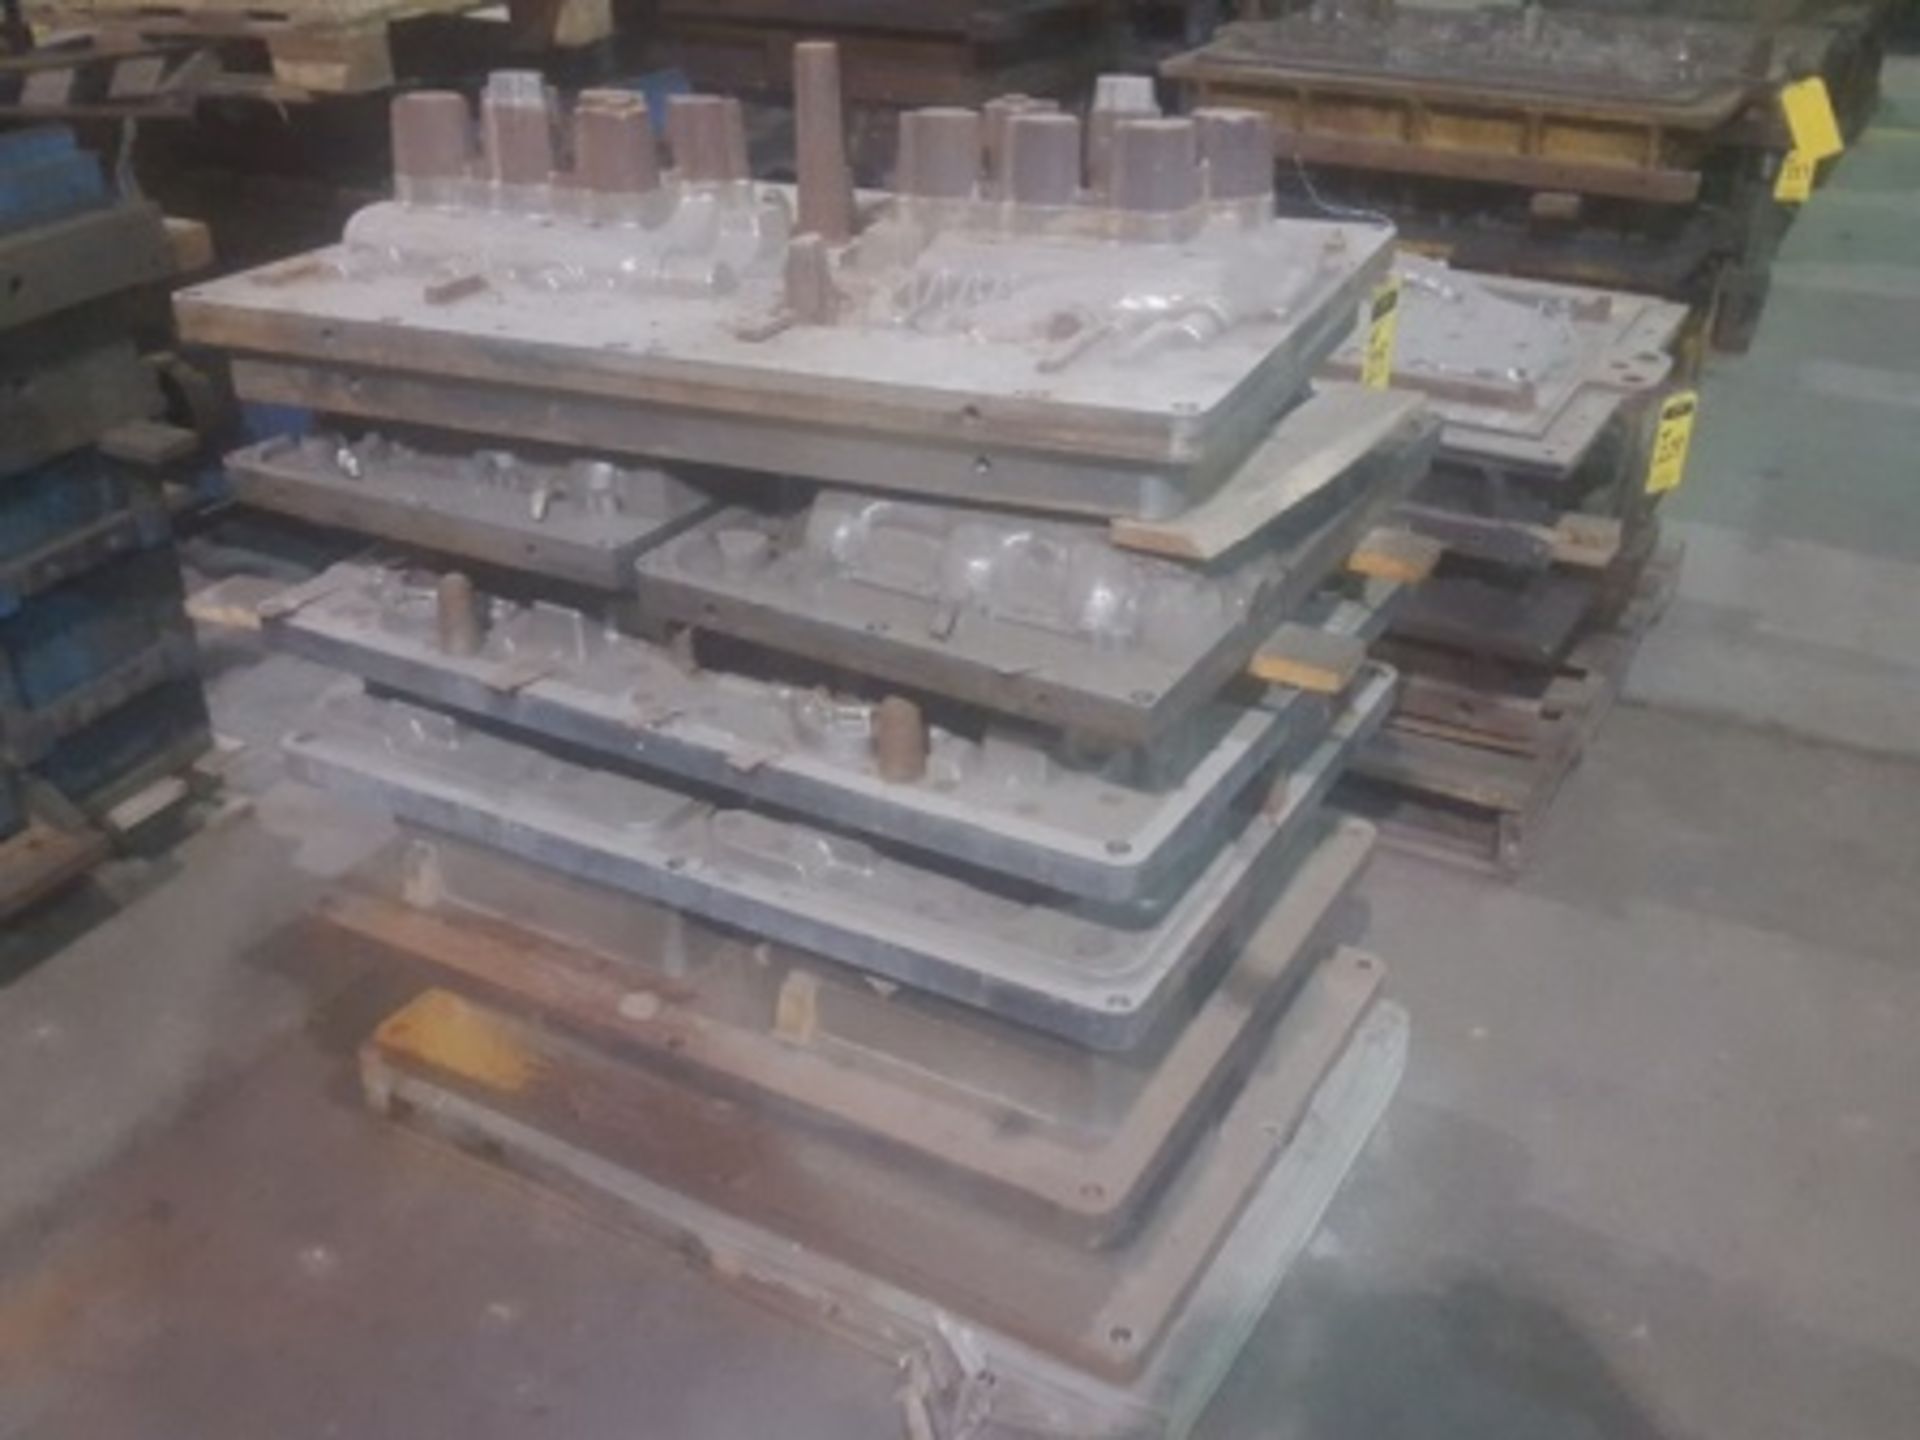 (10) Pallets of casting molds for aluminum intake manifolds for automotive engines